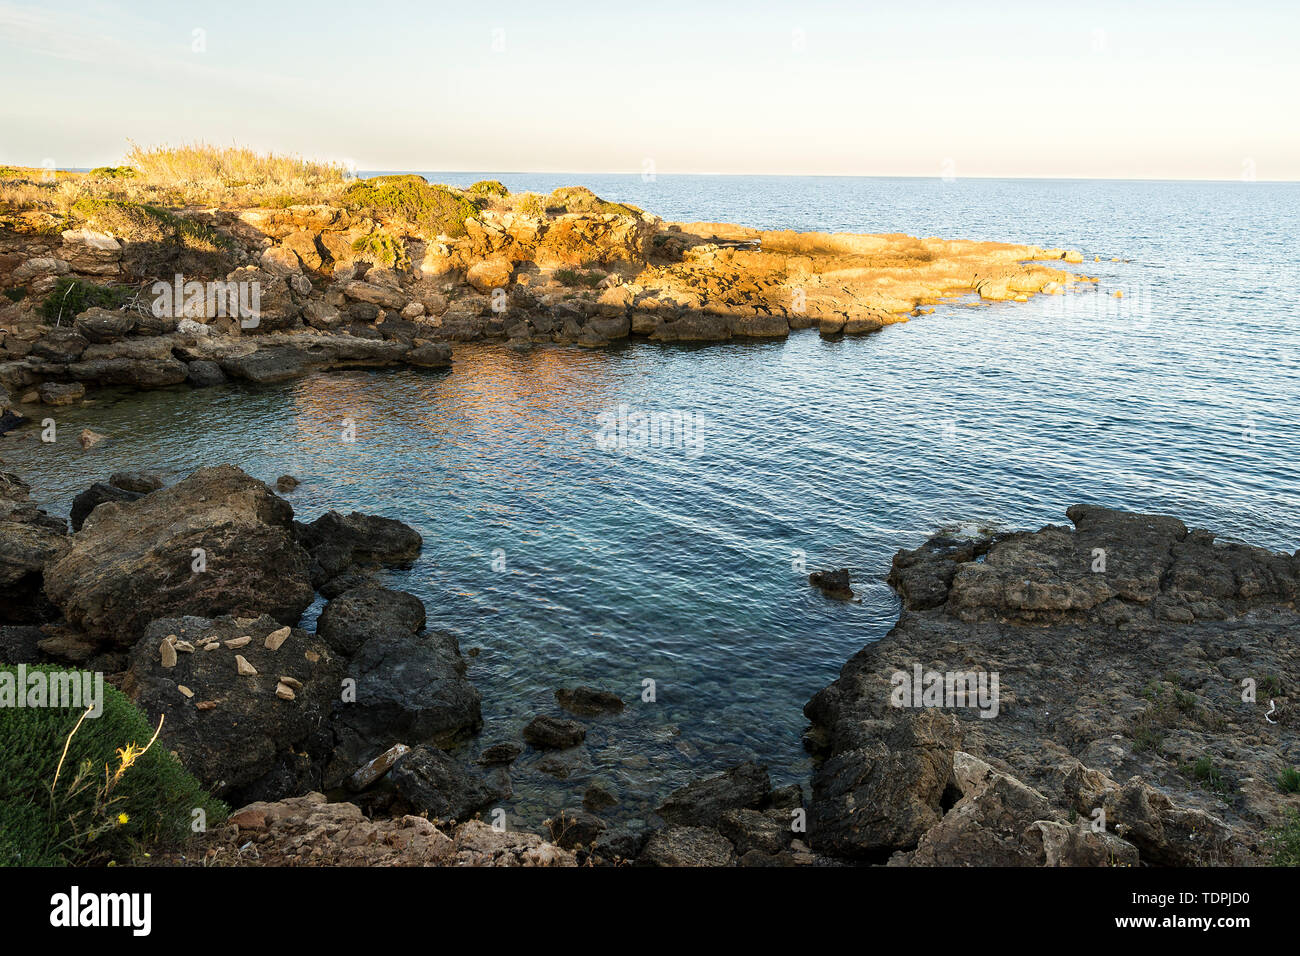 Landscapes of the Beach of Vendicari Nature Reserve in Sicily, Italy. Stock Photo